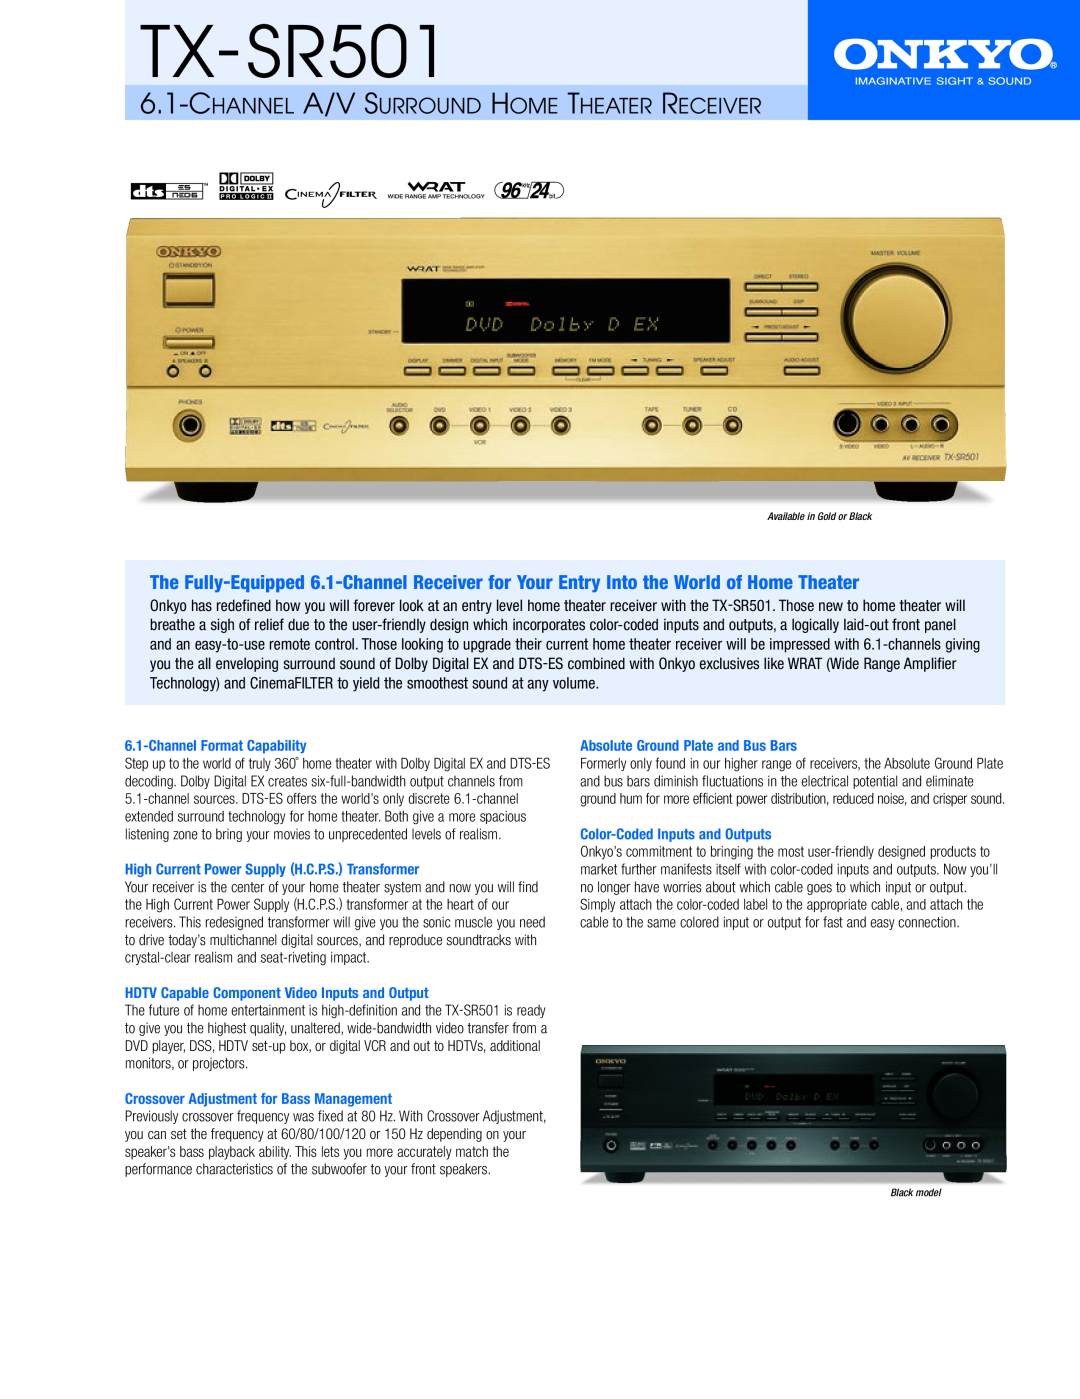 Onkyo TX-SR501 instruction manual Introduction, Basic Operation Guide, Enjoying audio and visual sources, Important notes 